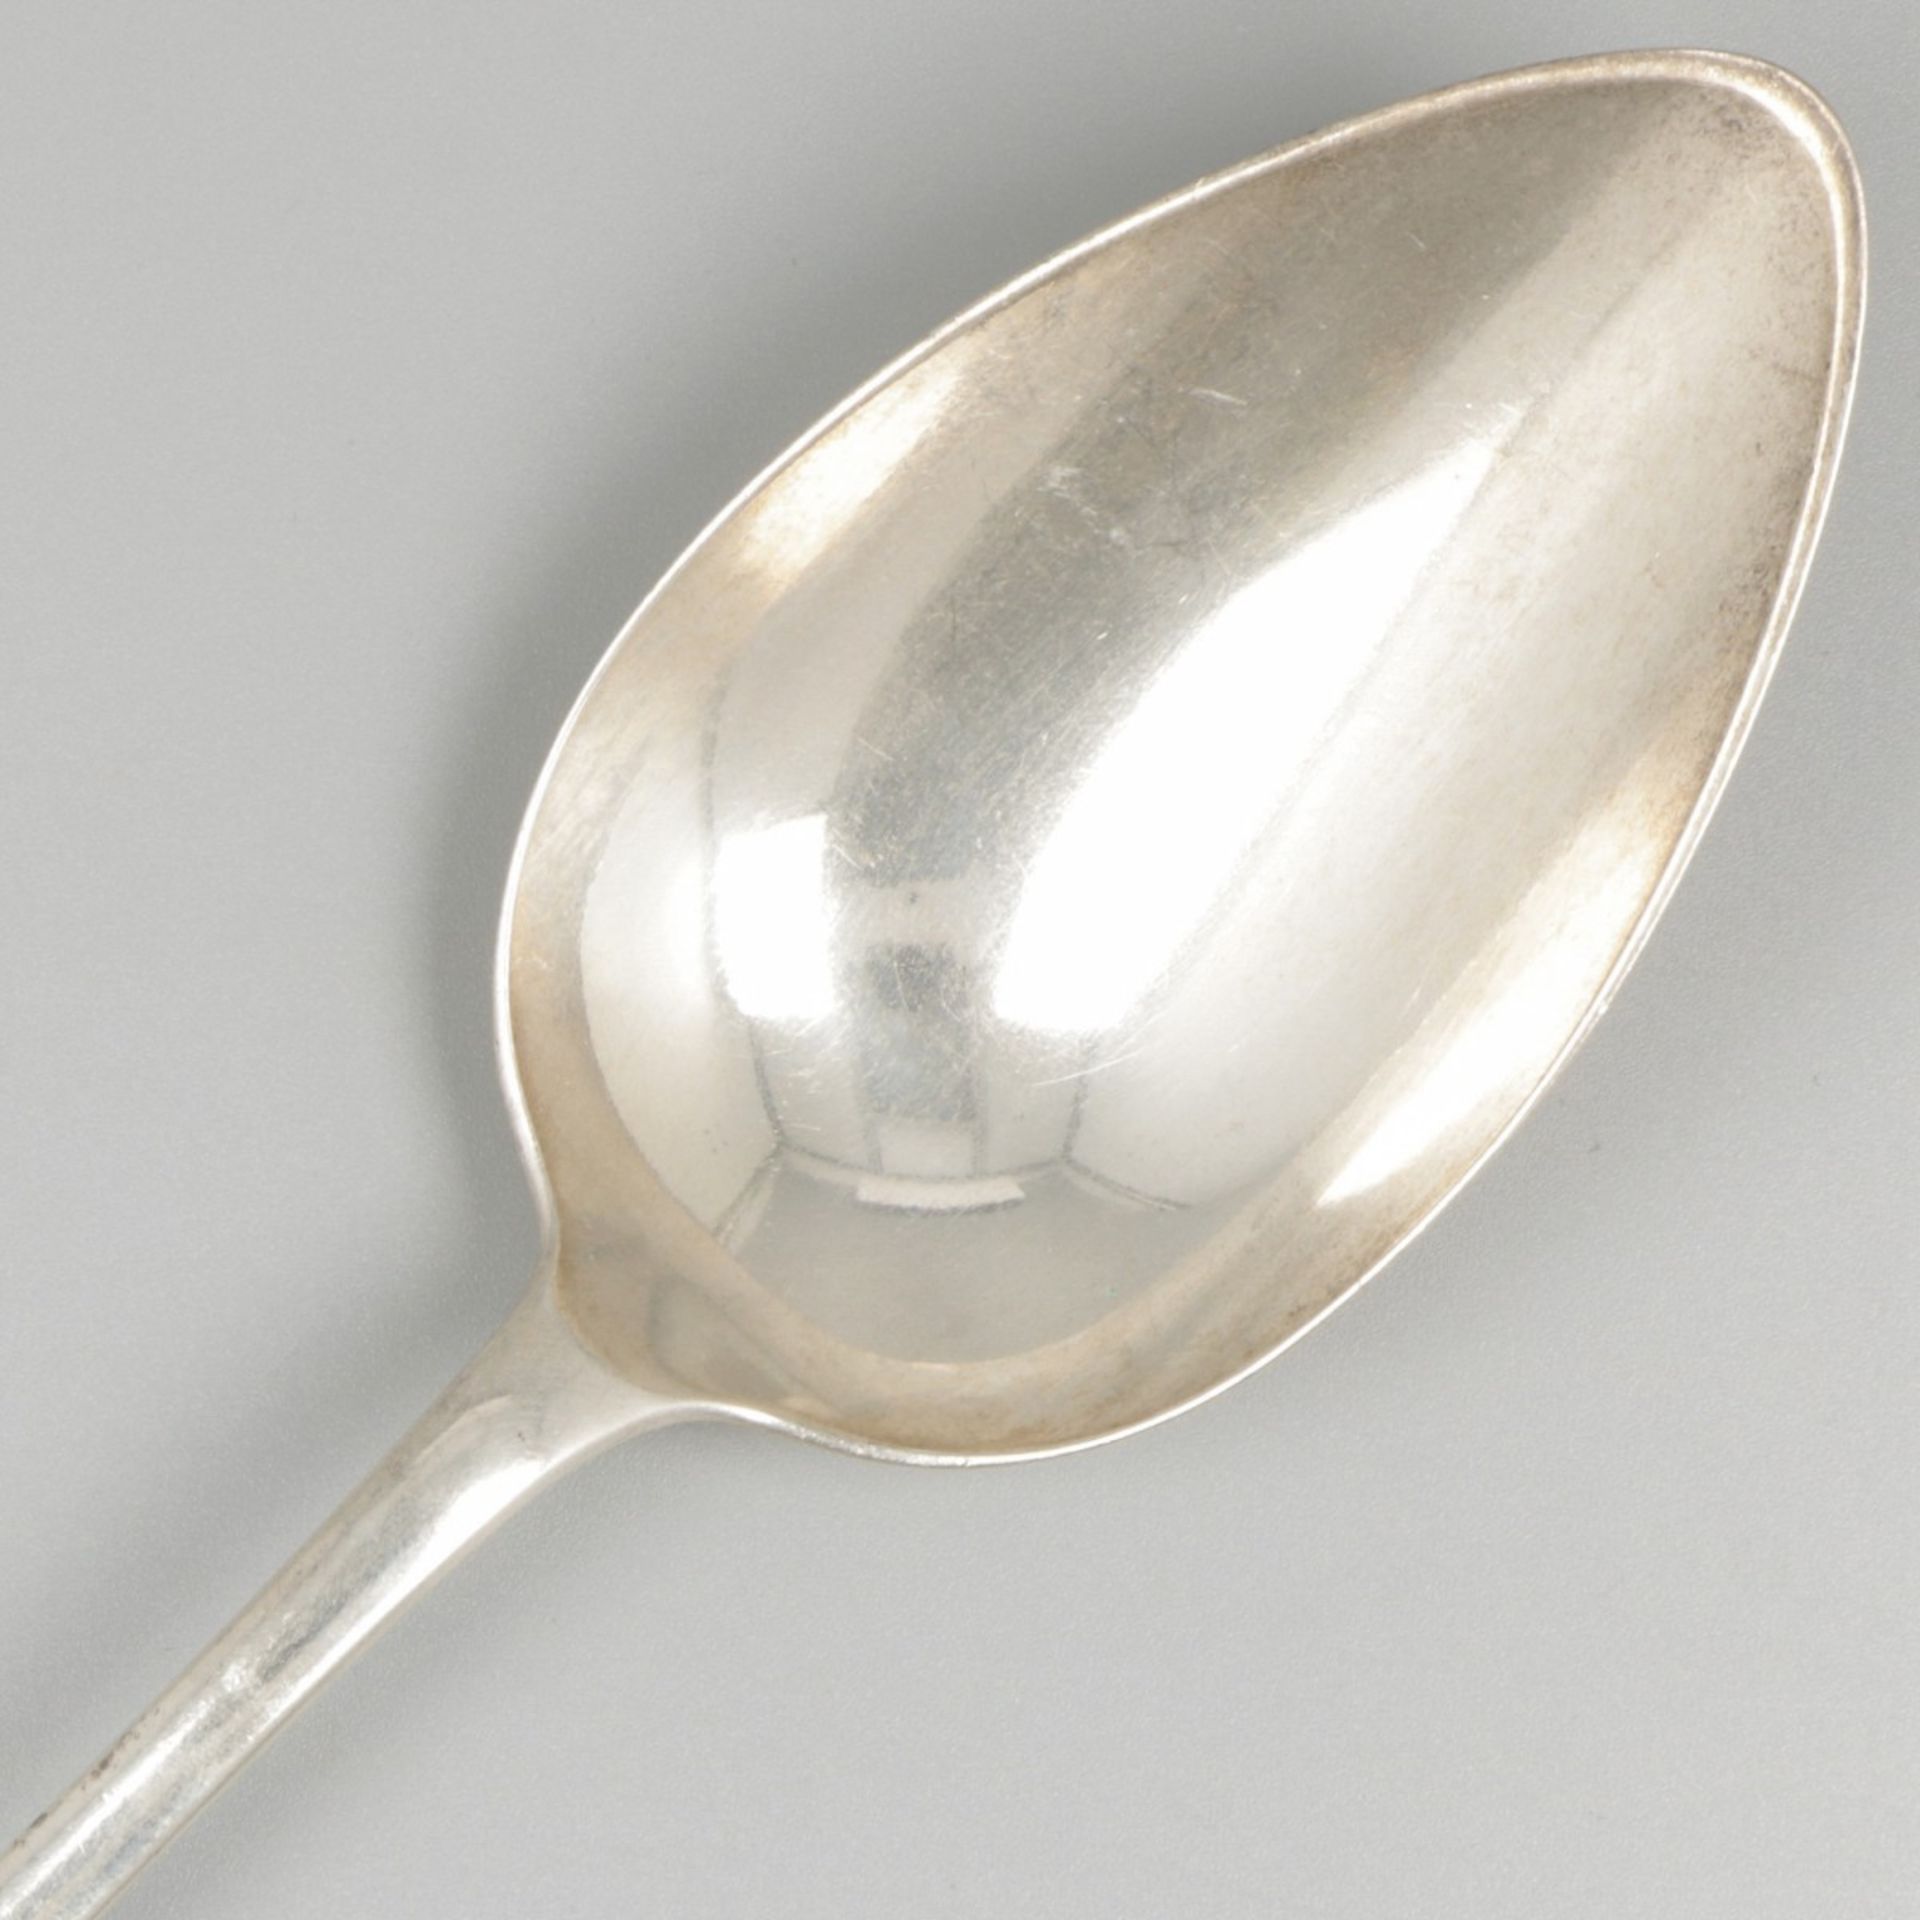 Salad servers ''Haags Lofje'' silver. - Image 7 of 9